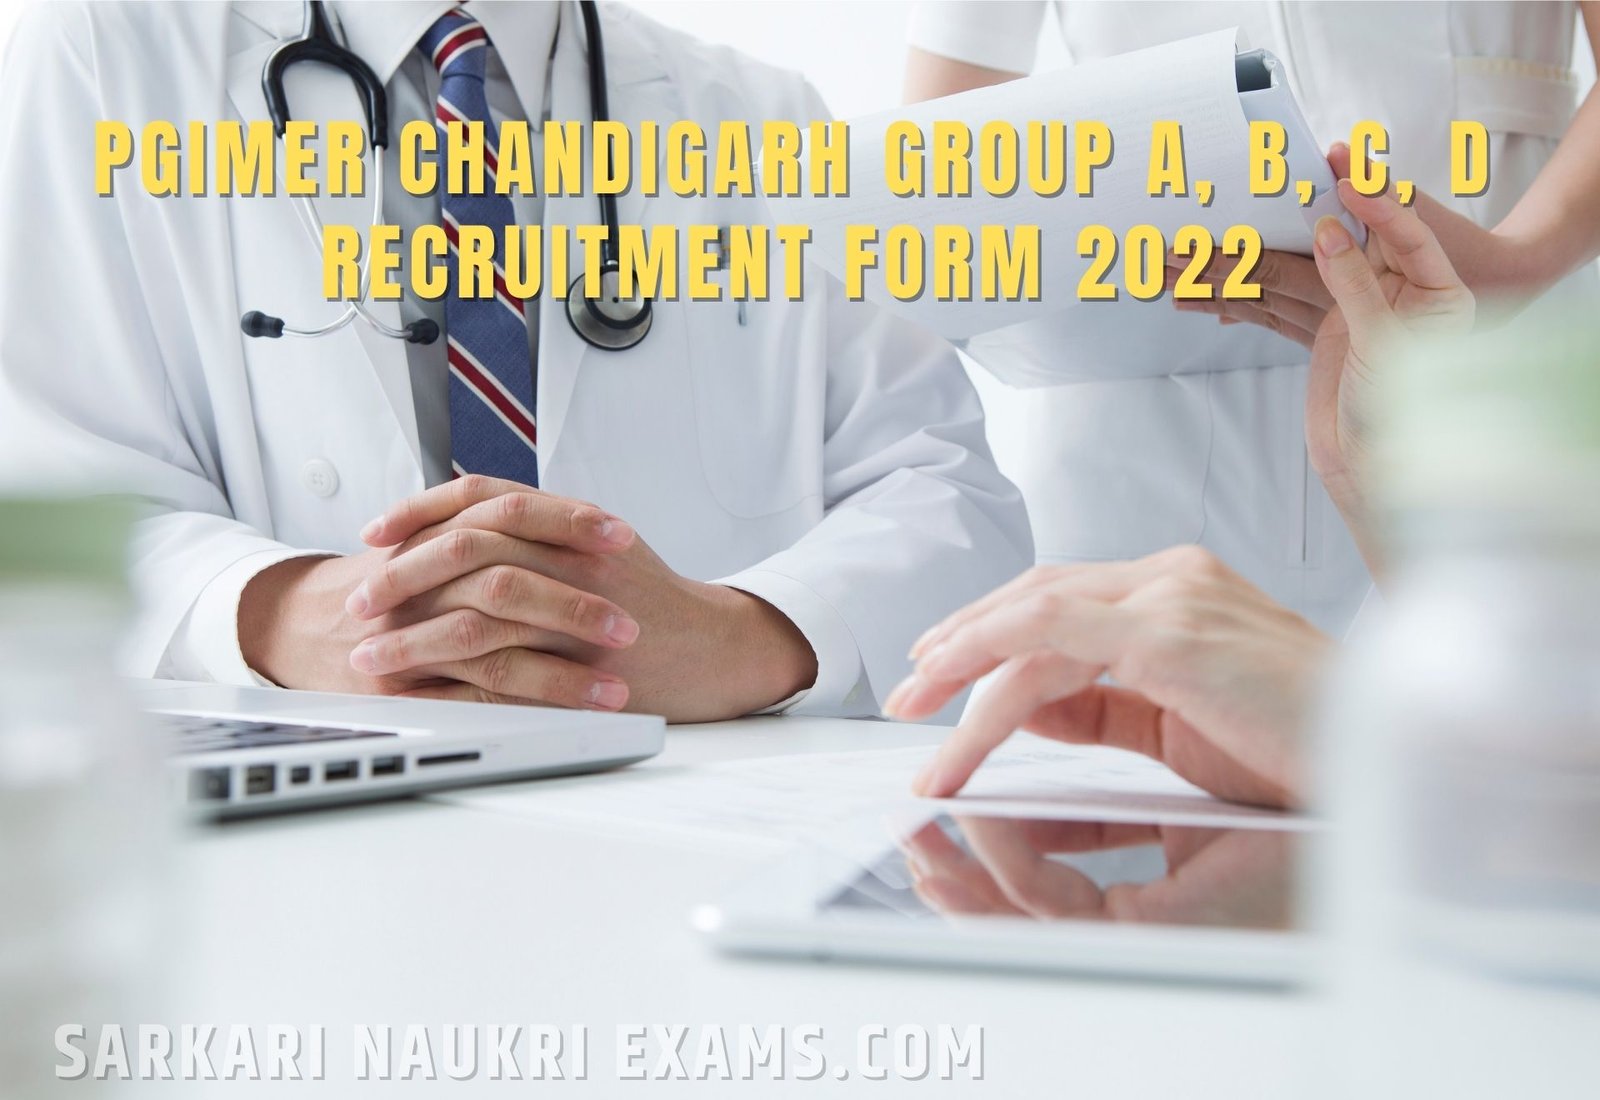 PGIMER Chandigarh Group A, B, C, D Recruitment Form 2022 | Salary Up To 177500/-